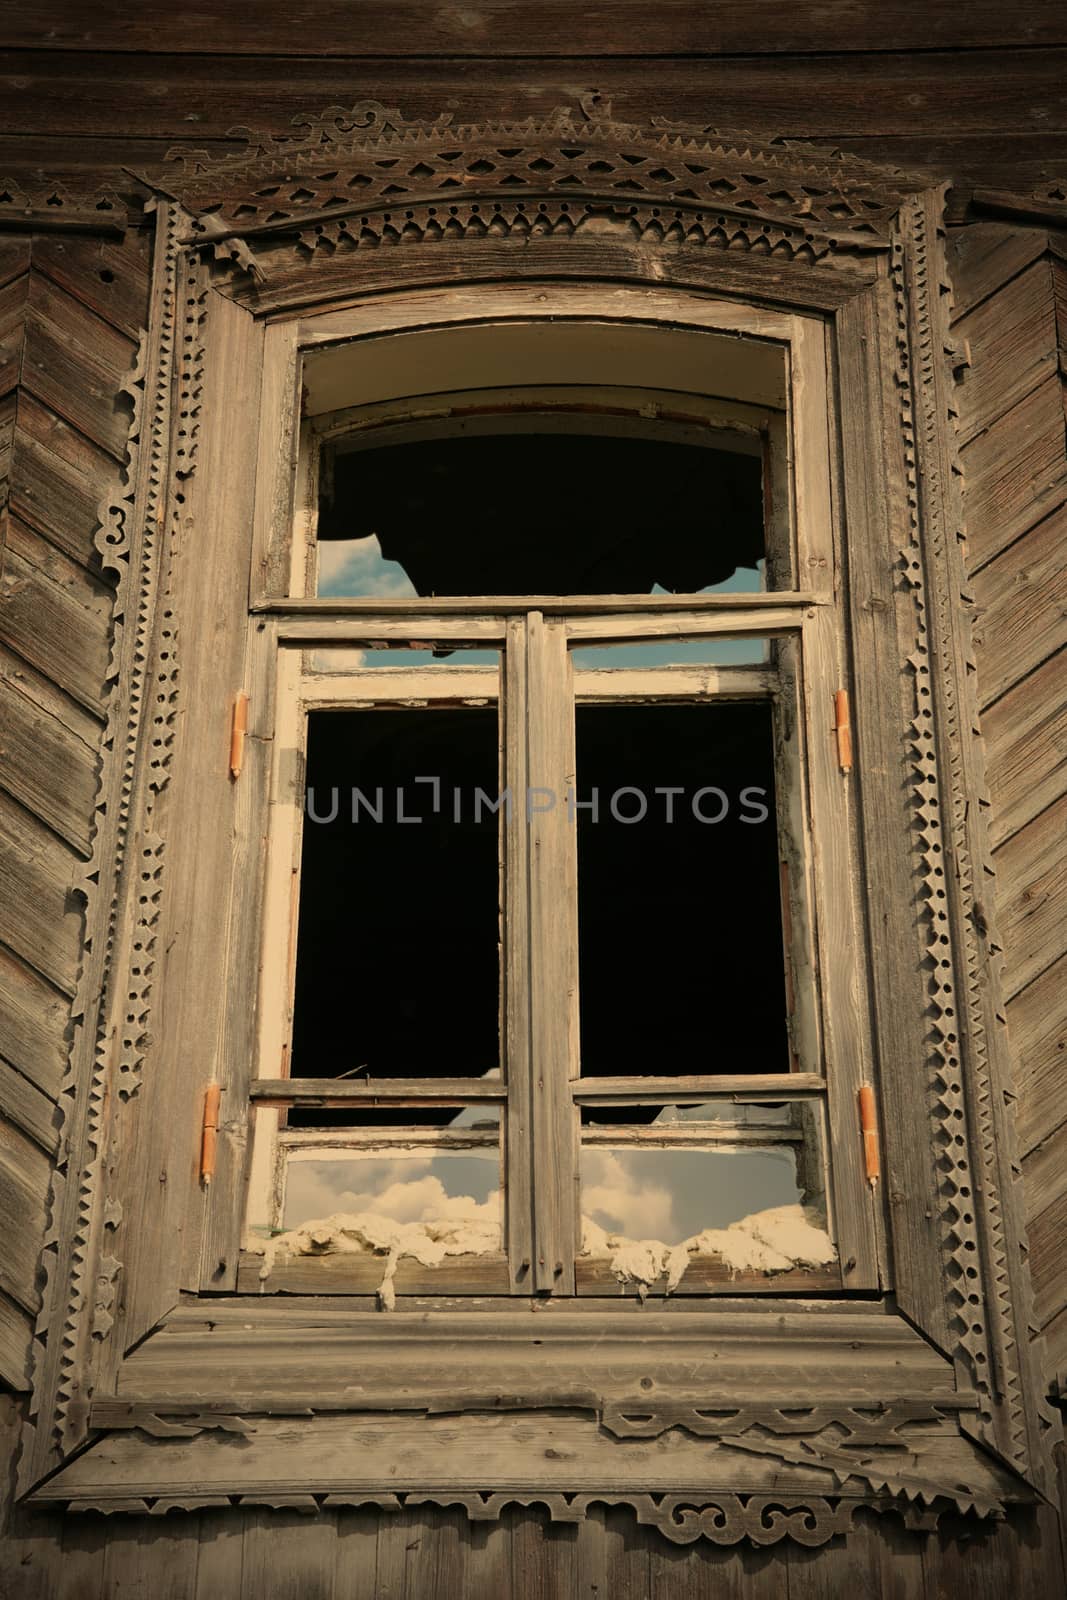 window of the old-time building with splinter glass, Ural culture, Russia, instagram image style